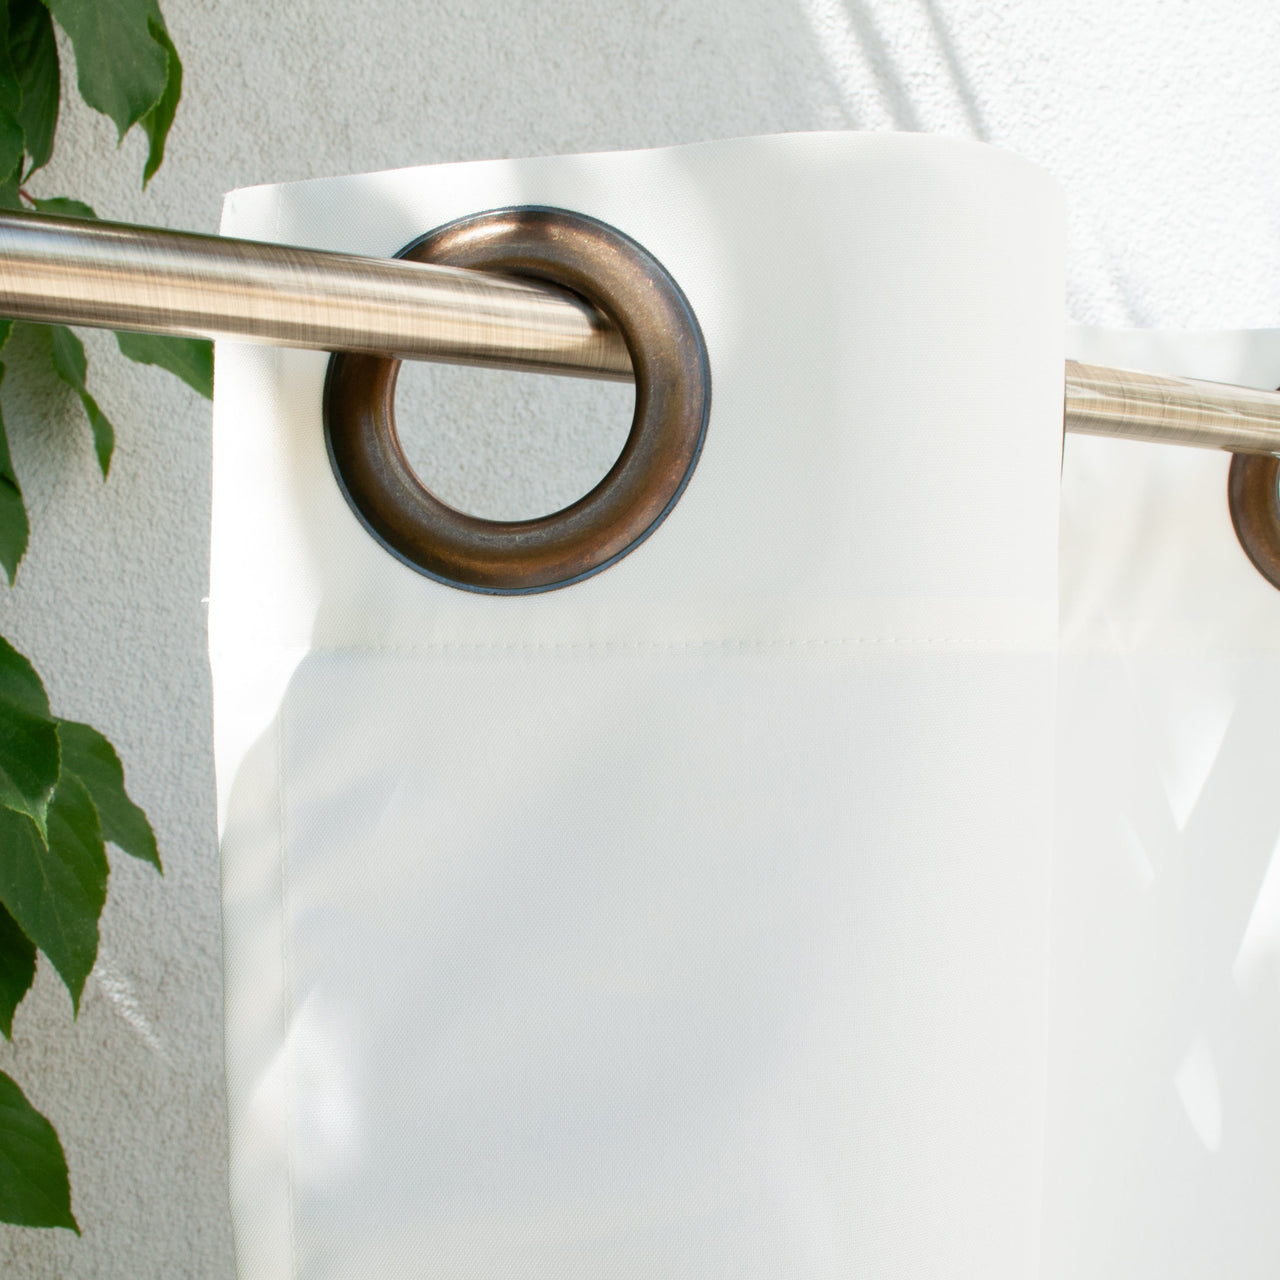 Outdoor Curtain with Weighted Bags on the Bottom - Grommet Top, Velcro Tabs or Sleeve Top